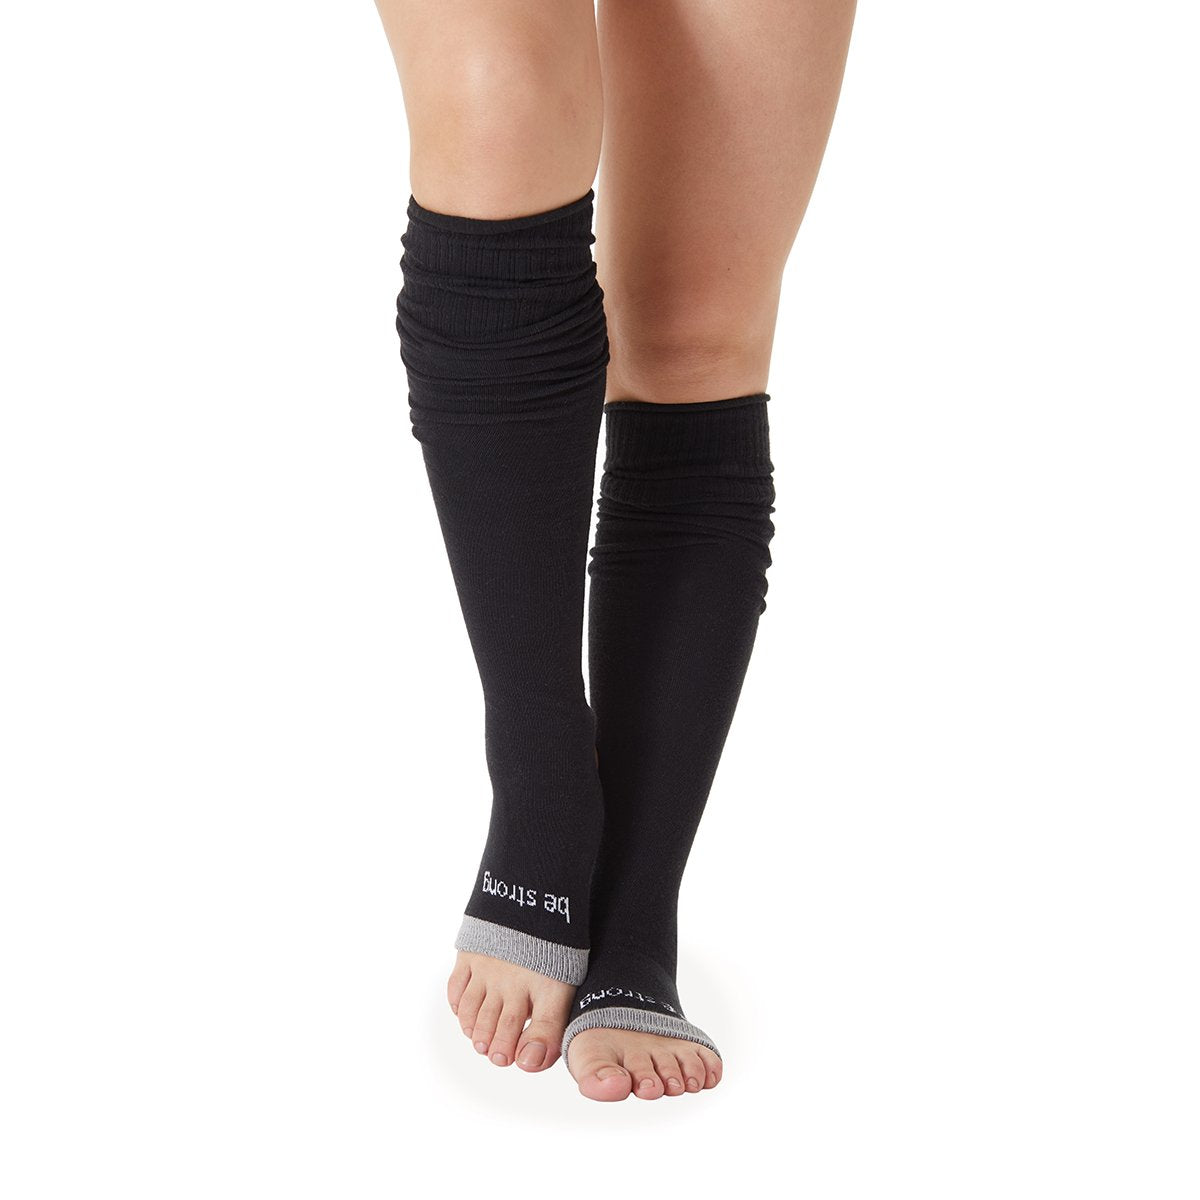 Sticky Be Grip Stirrup Leg Warmers - Black Be Strong